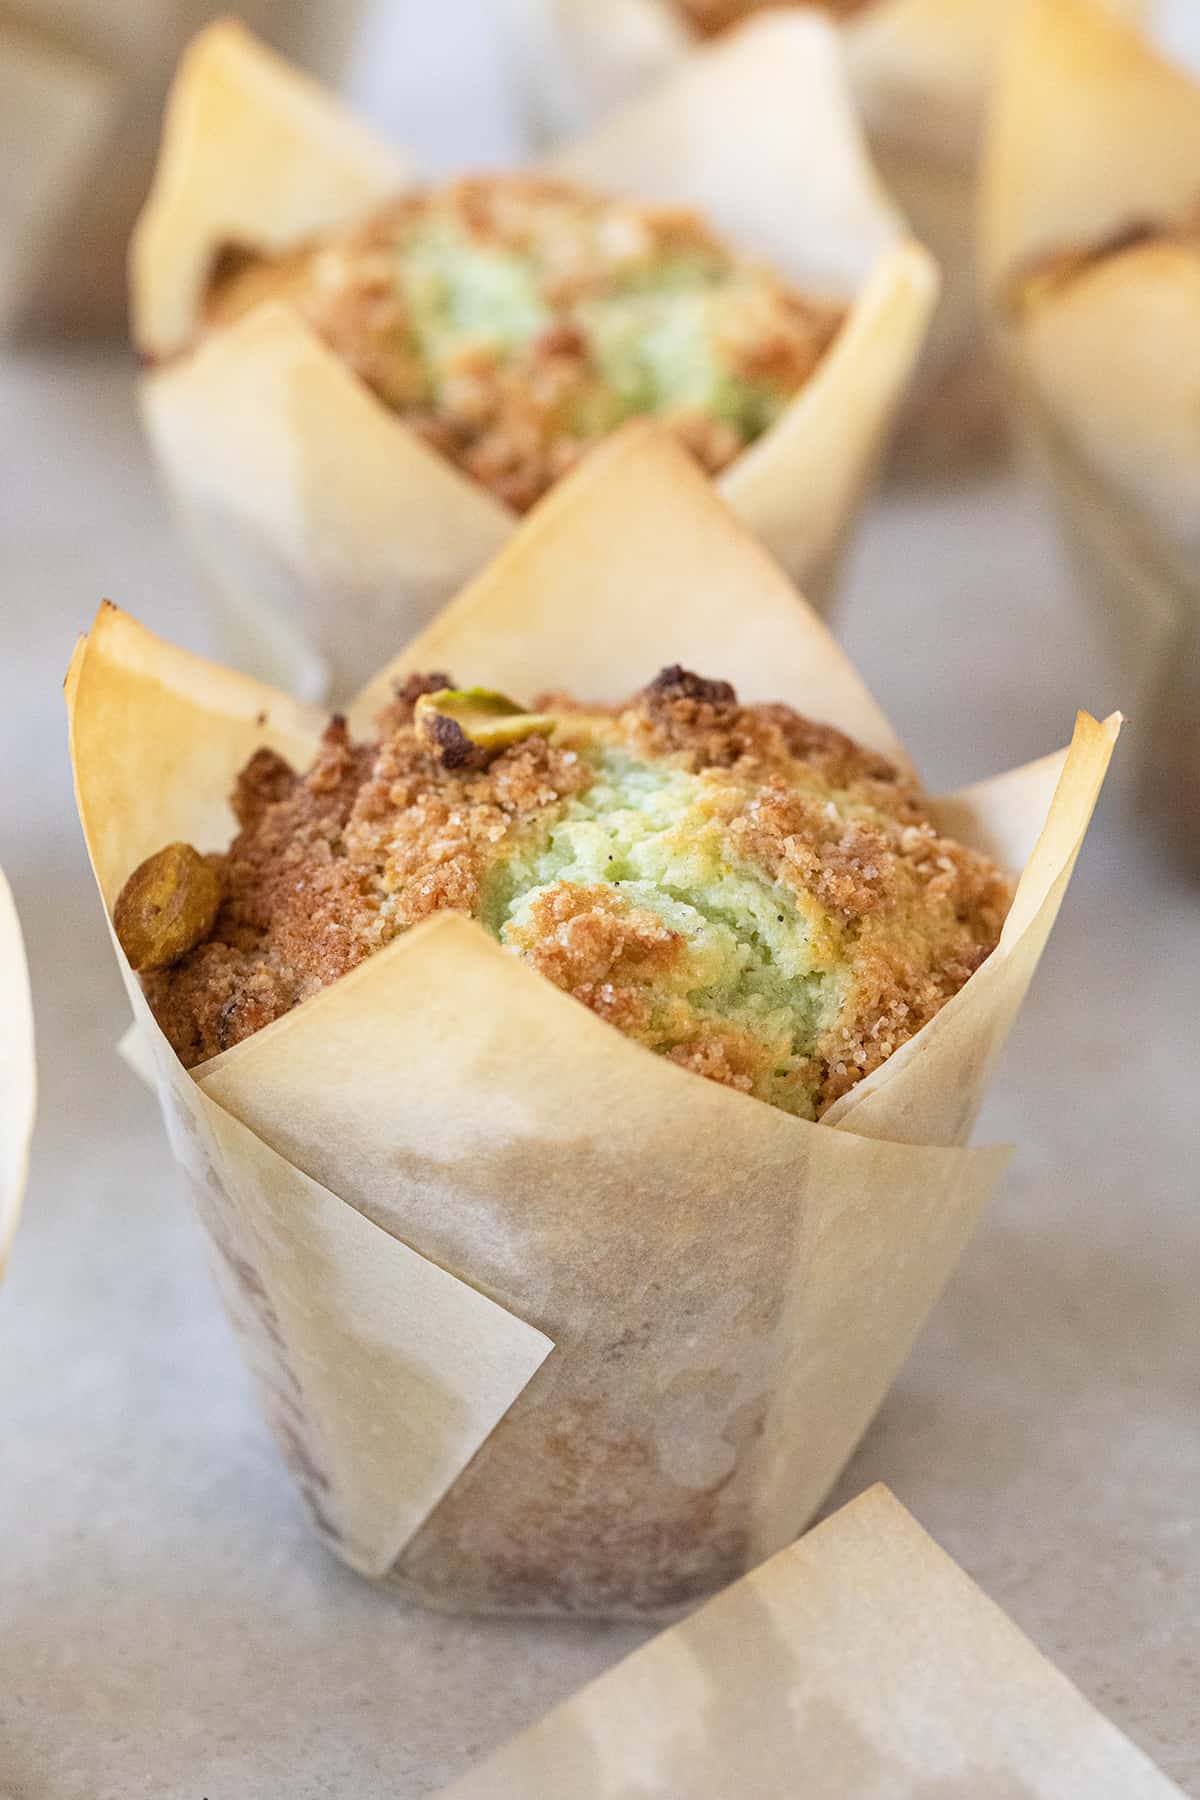 Pistachio muffins in tulip muffin papers.